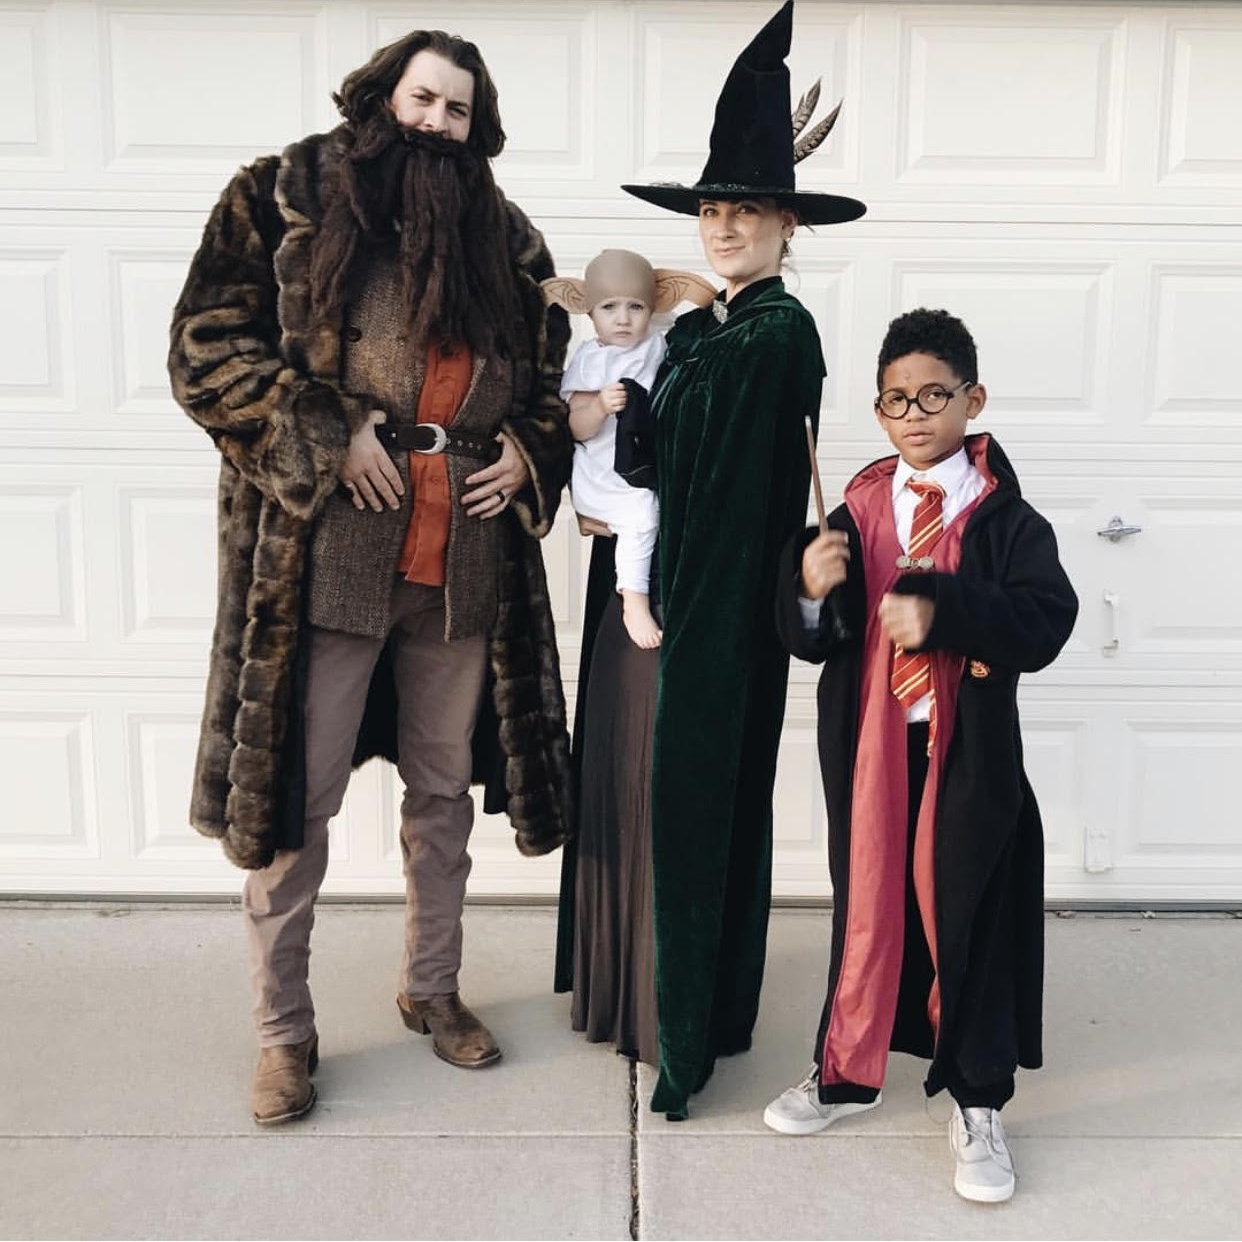 HALLOWEEN COSTUME ROUNDUP — The Ever Co